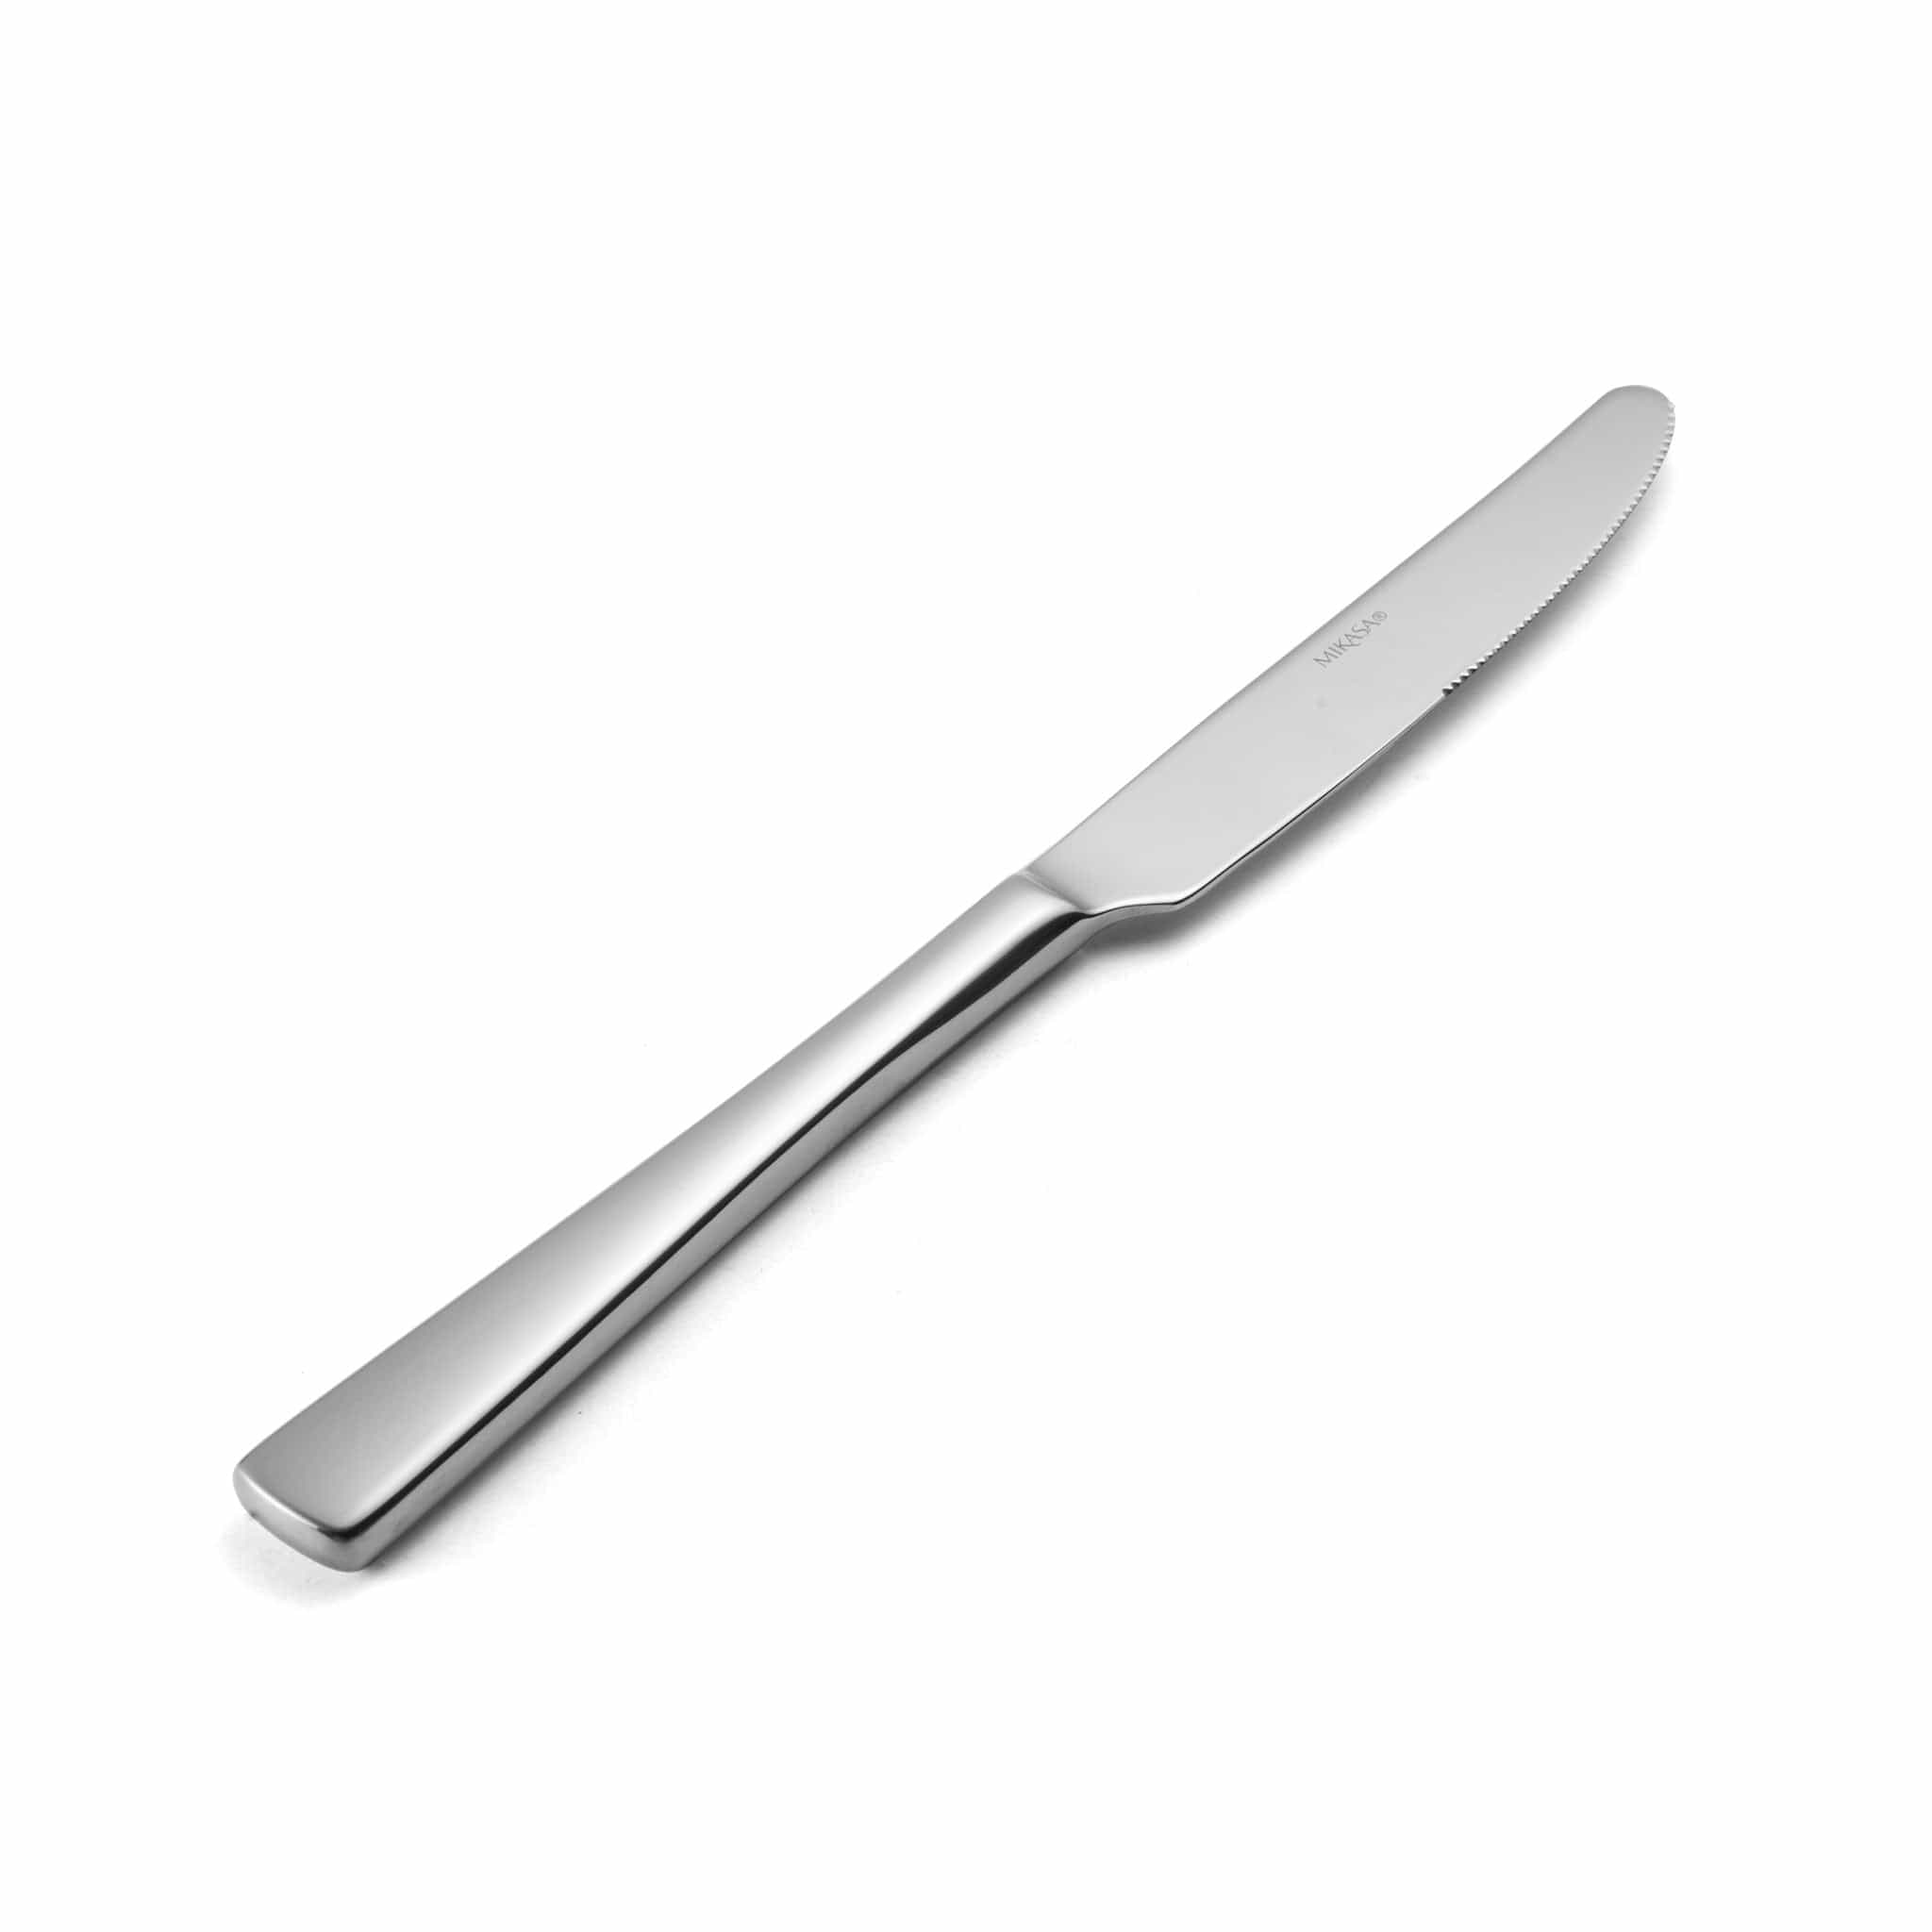 Paro 18/10 Table Knife 9.1" Stainless Steel